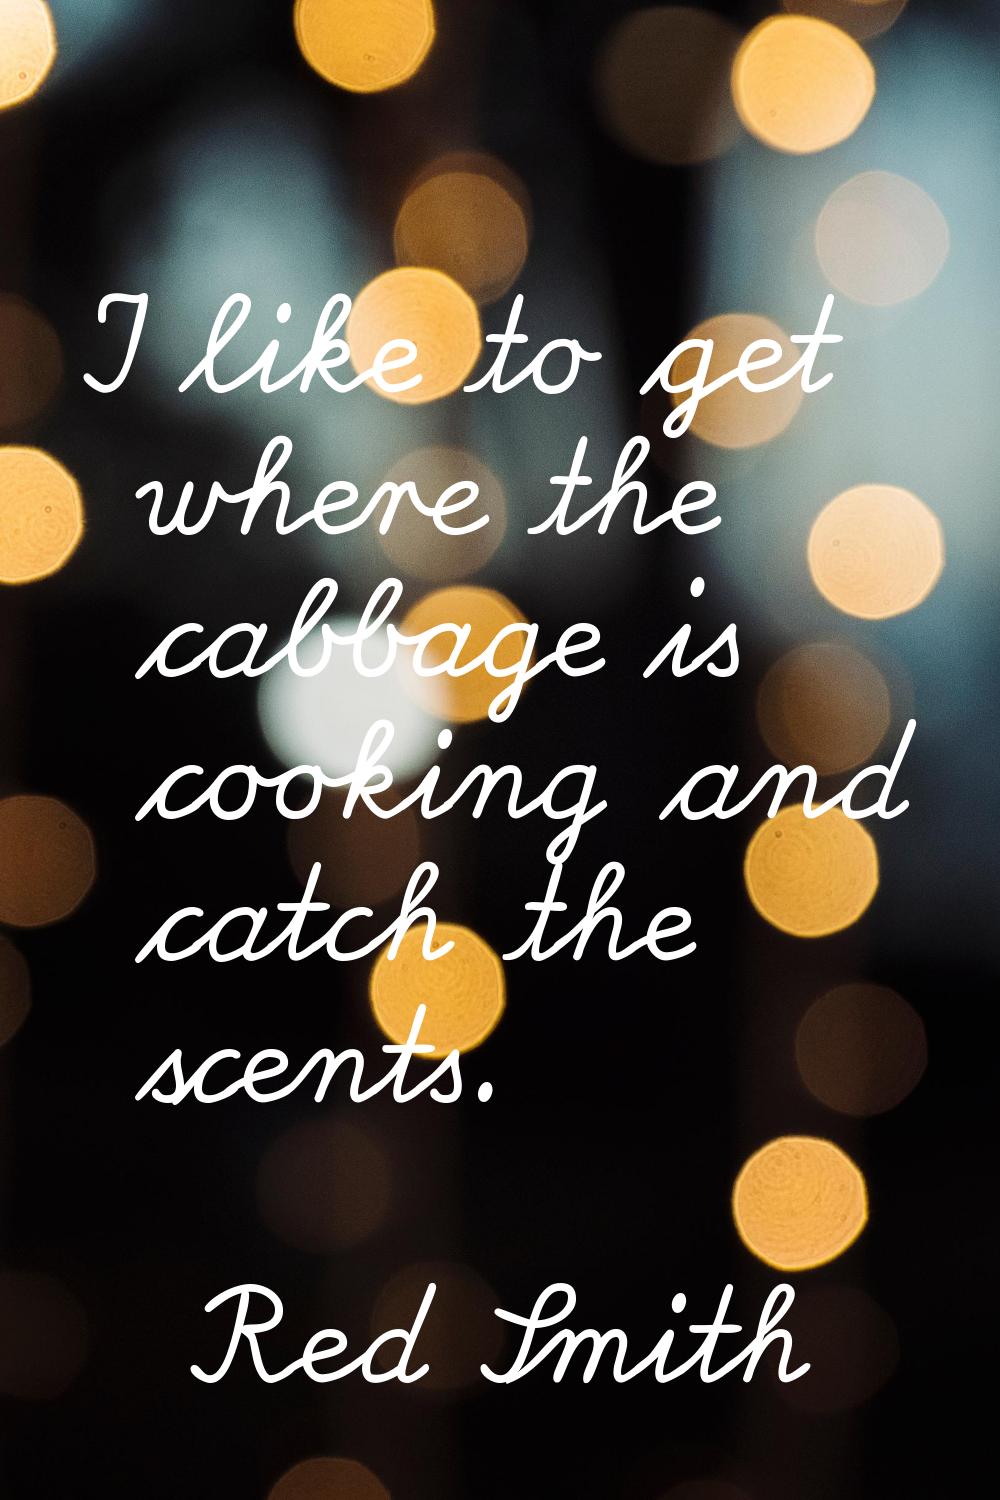 I like to get where the cabbage is cooking and catch the scents.